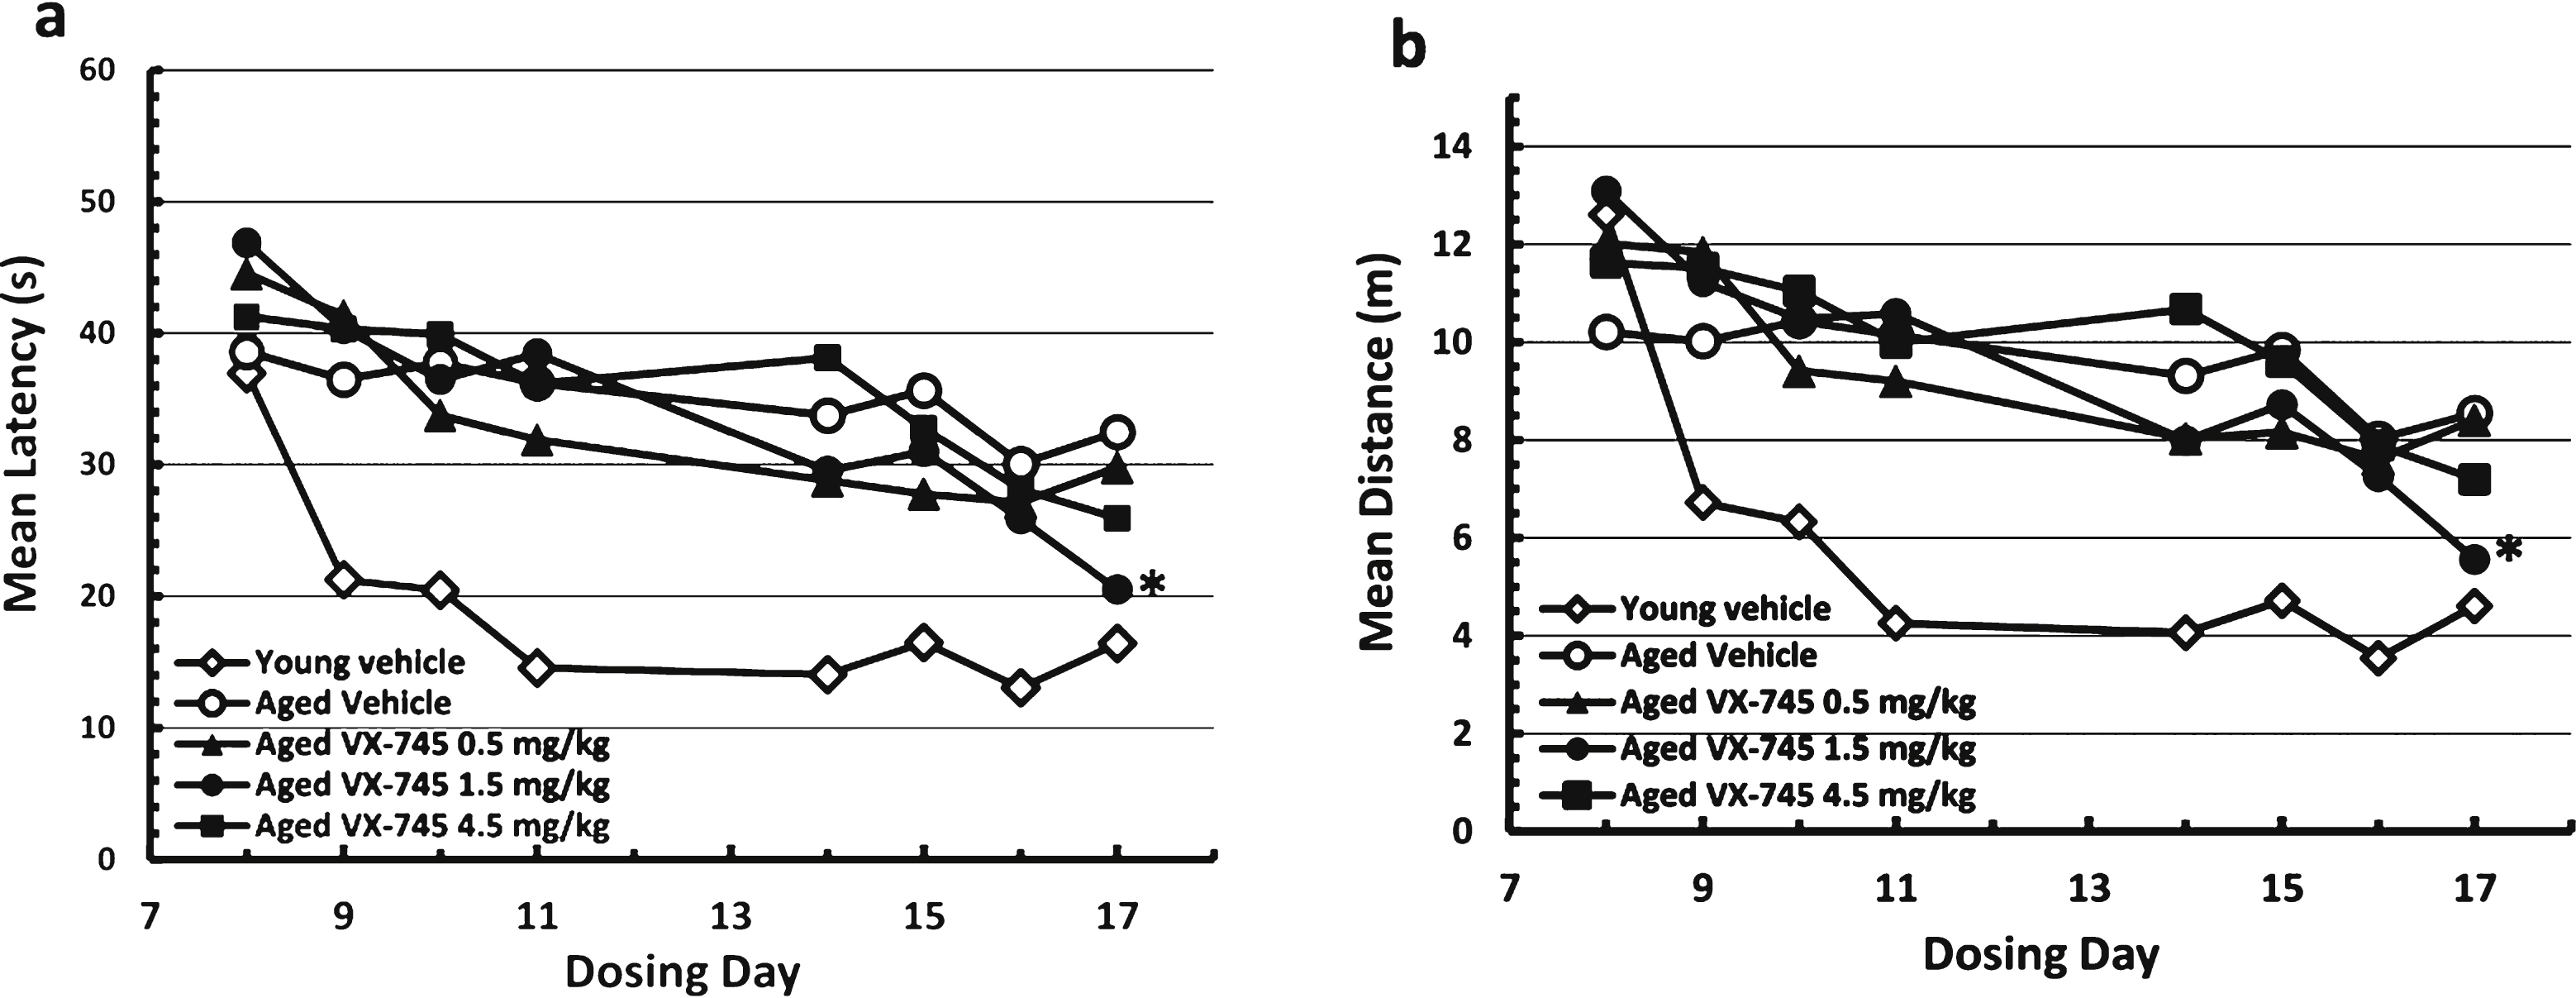 Morris water maze test results during acquisition phase. Results in vehicle-treated young rats and aged rats treated with 0.5, 1.5, or 4.5 mg/kg VX-745 shown as mean (±SEM) Latency (a) and mean (±SEM) Distance (b) by Day of testing.  *p <  0.05, for 1.5 mg/kg VX-745 versus aged-vehicle treated rats at last day of testing.